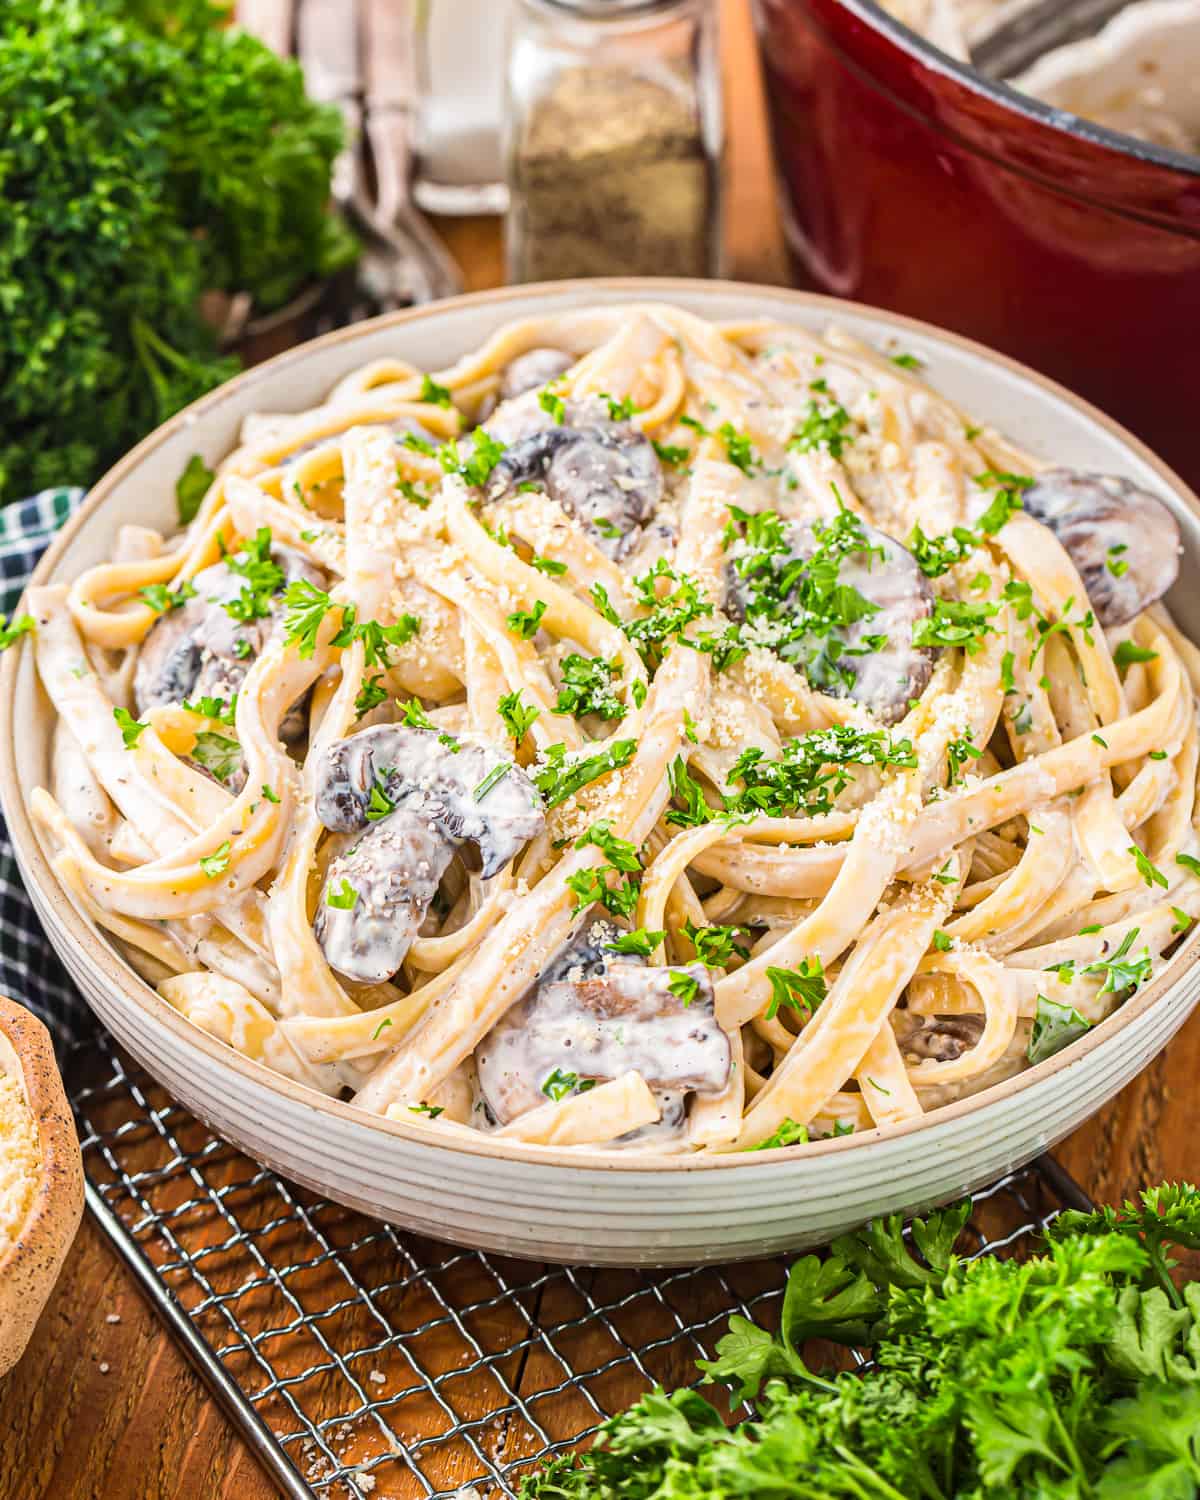 a serving bowl of pasta with mushrooms and parsley in a creamy pasta sauce.